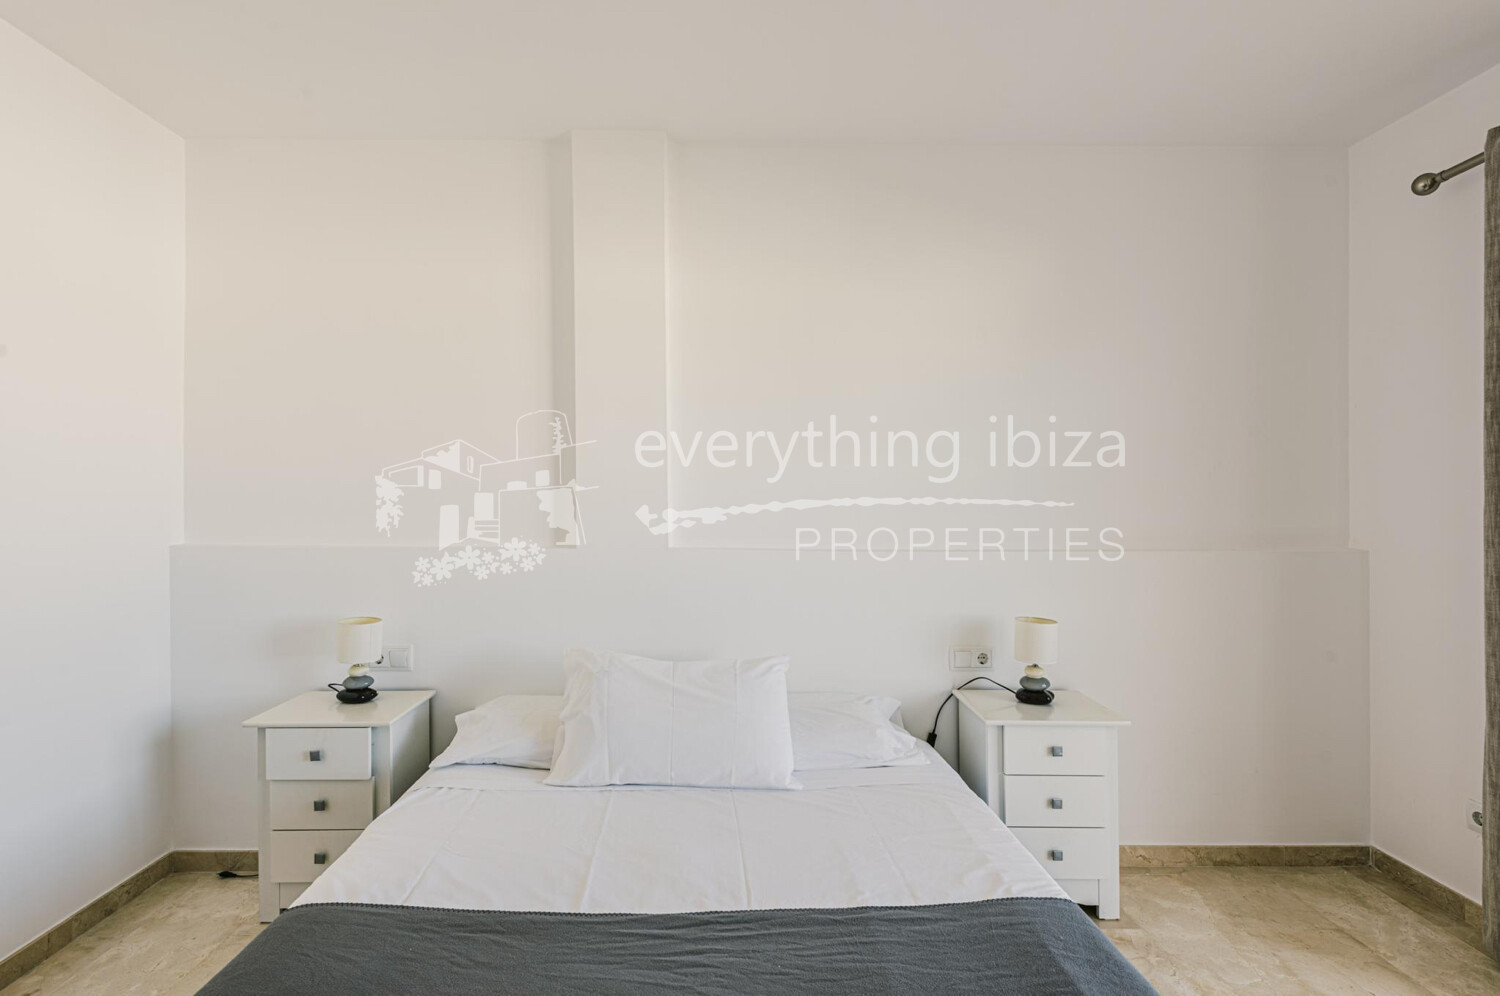 Delightful Townhouse in Stunning Rural Setting Near Roca Llisa Golf Course, ref. 1677, on sale in Ibiza by everything ibiza Properties